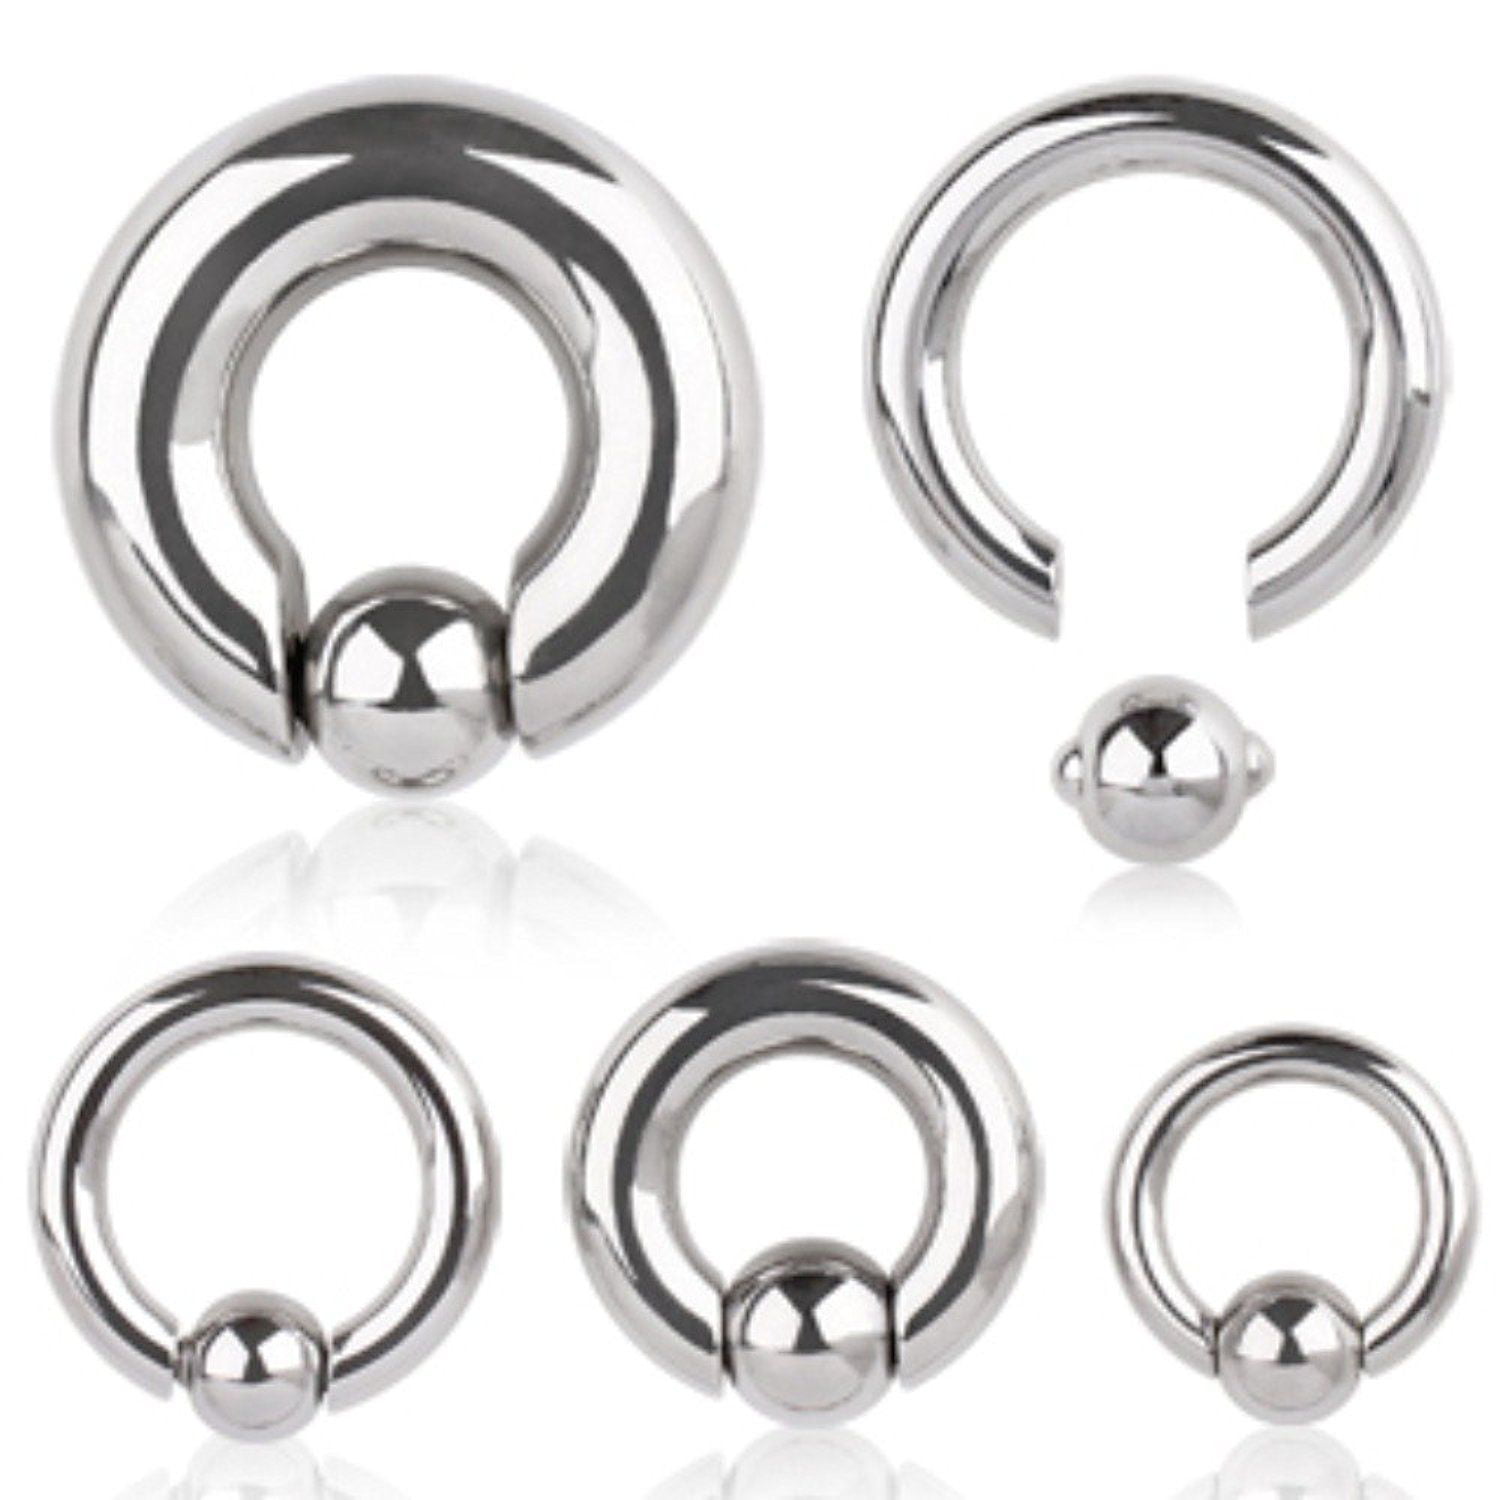 1 PAIR 316L Surgical Steel Captive Bead Ring Spring Loaded Pop In Bead 